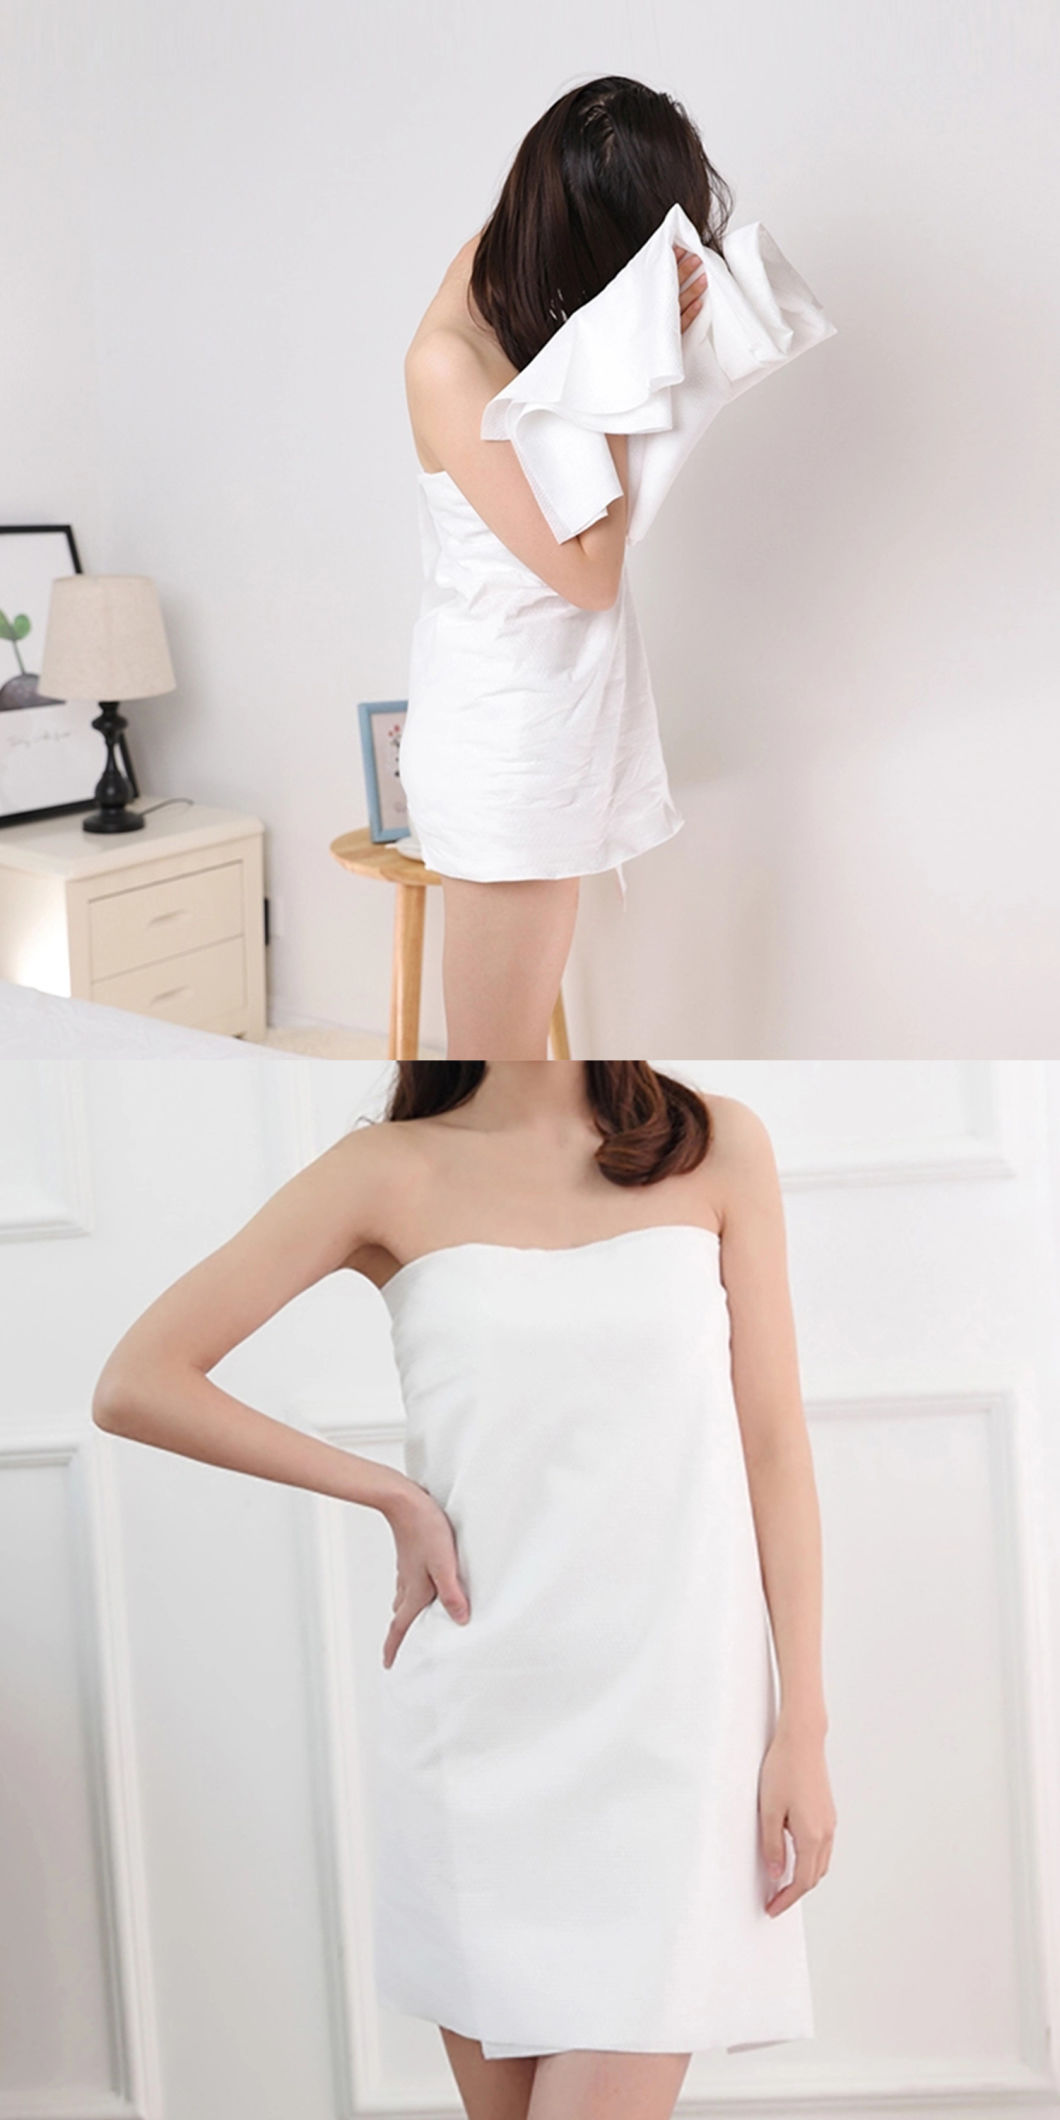 Hotel Body and Face Cleaning Linen Feel Quick Dry Non Woven Disposable Spunlace Bath Towel